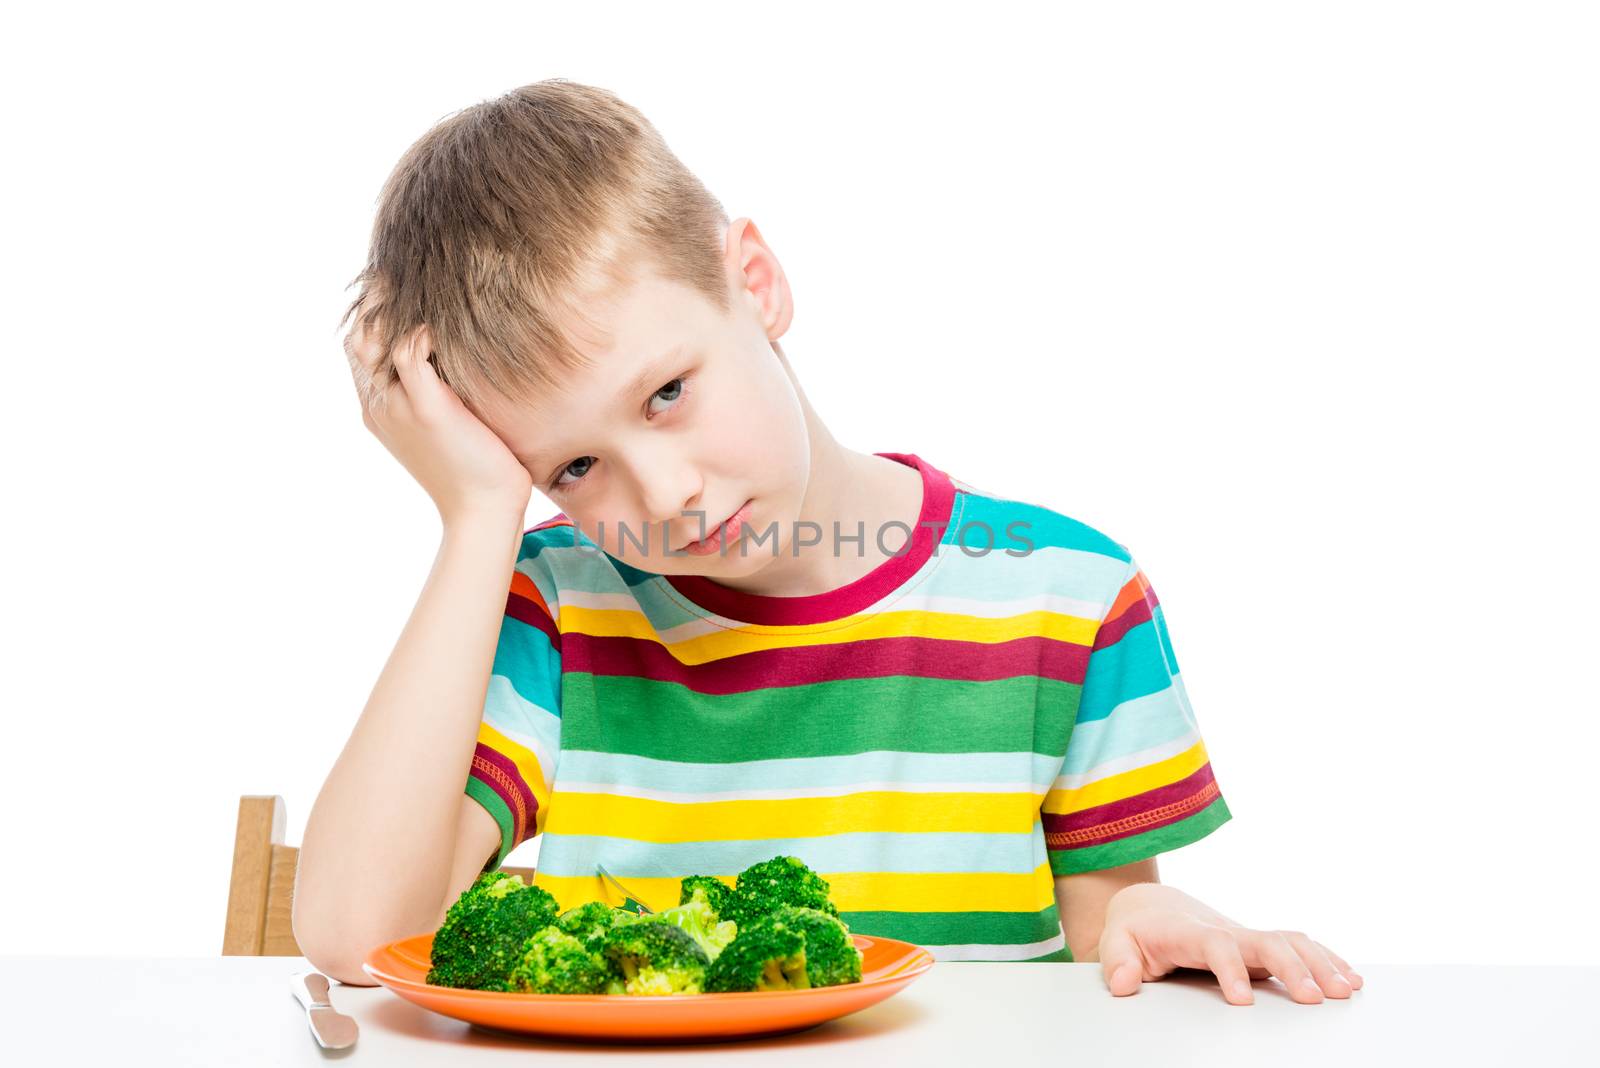 Sad child with a plate of broccoli at the table, portrait isolat by kosmsos111